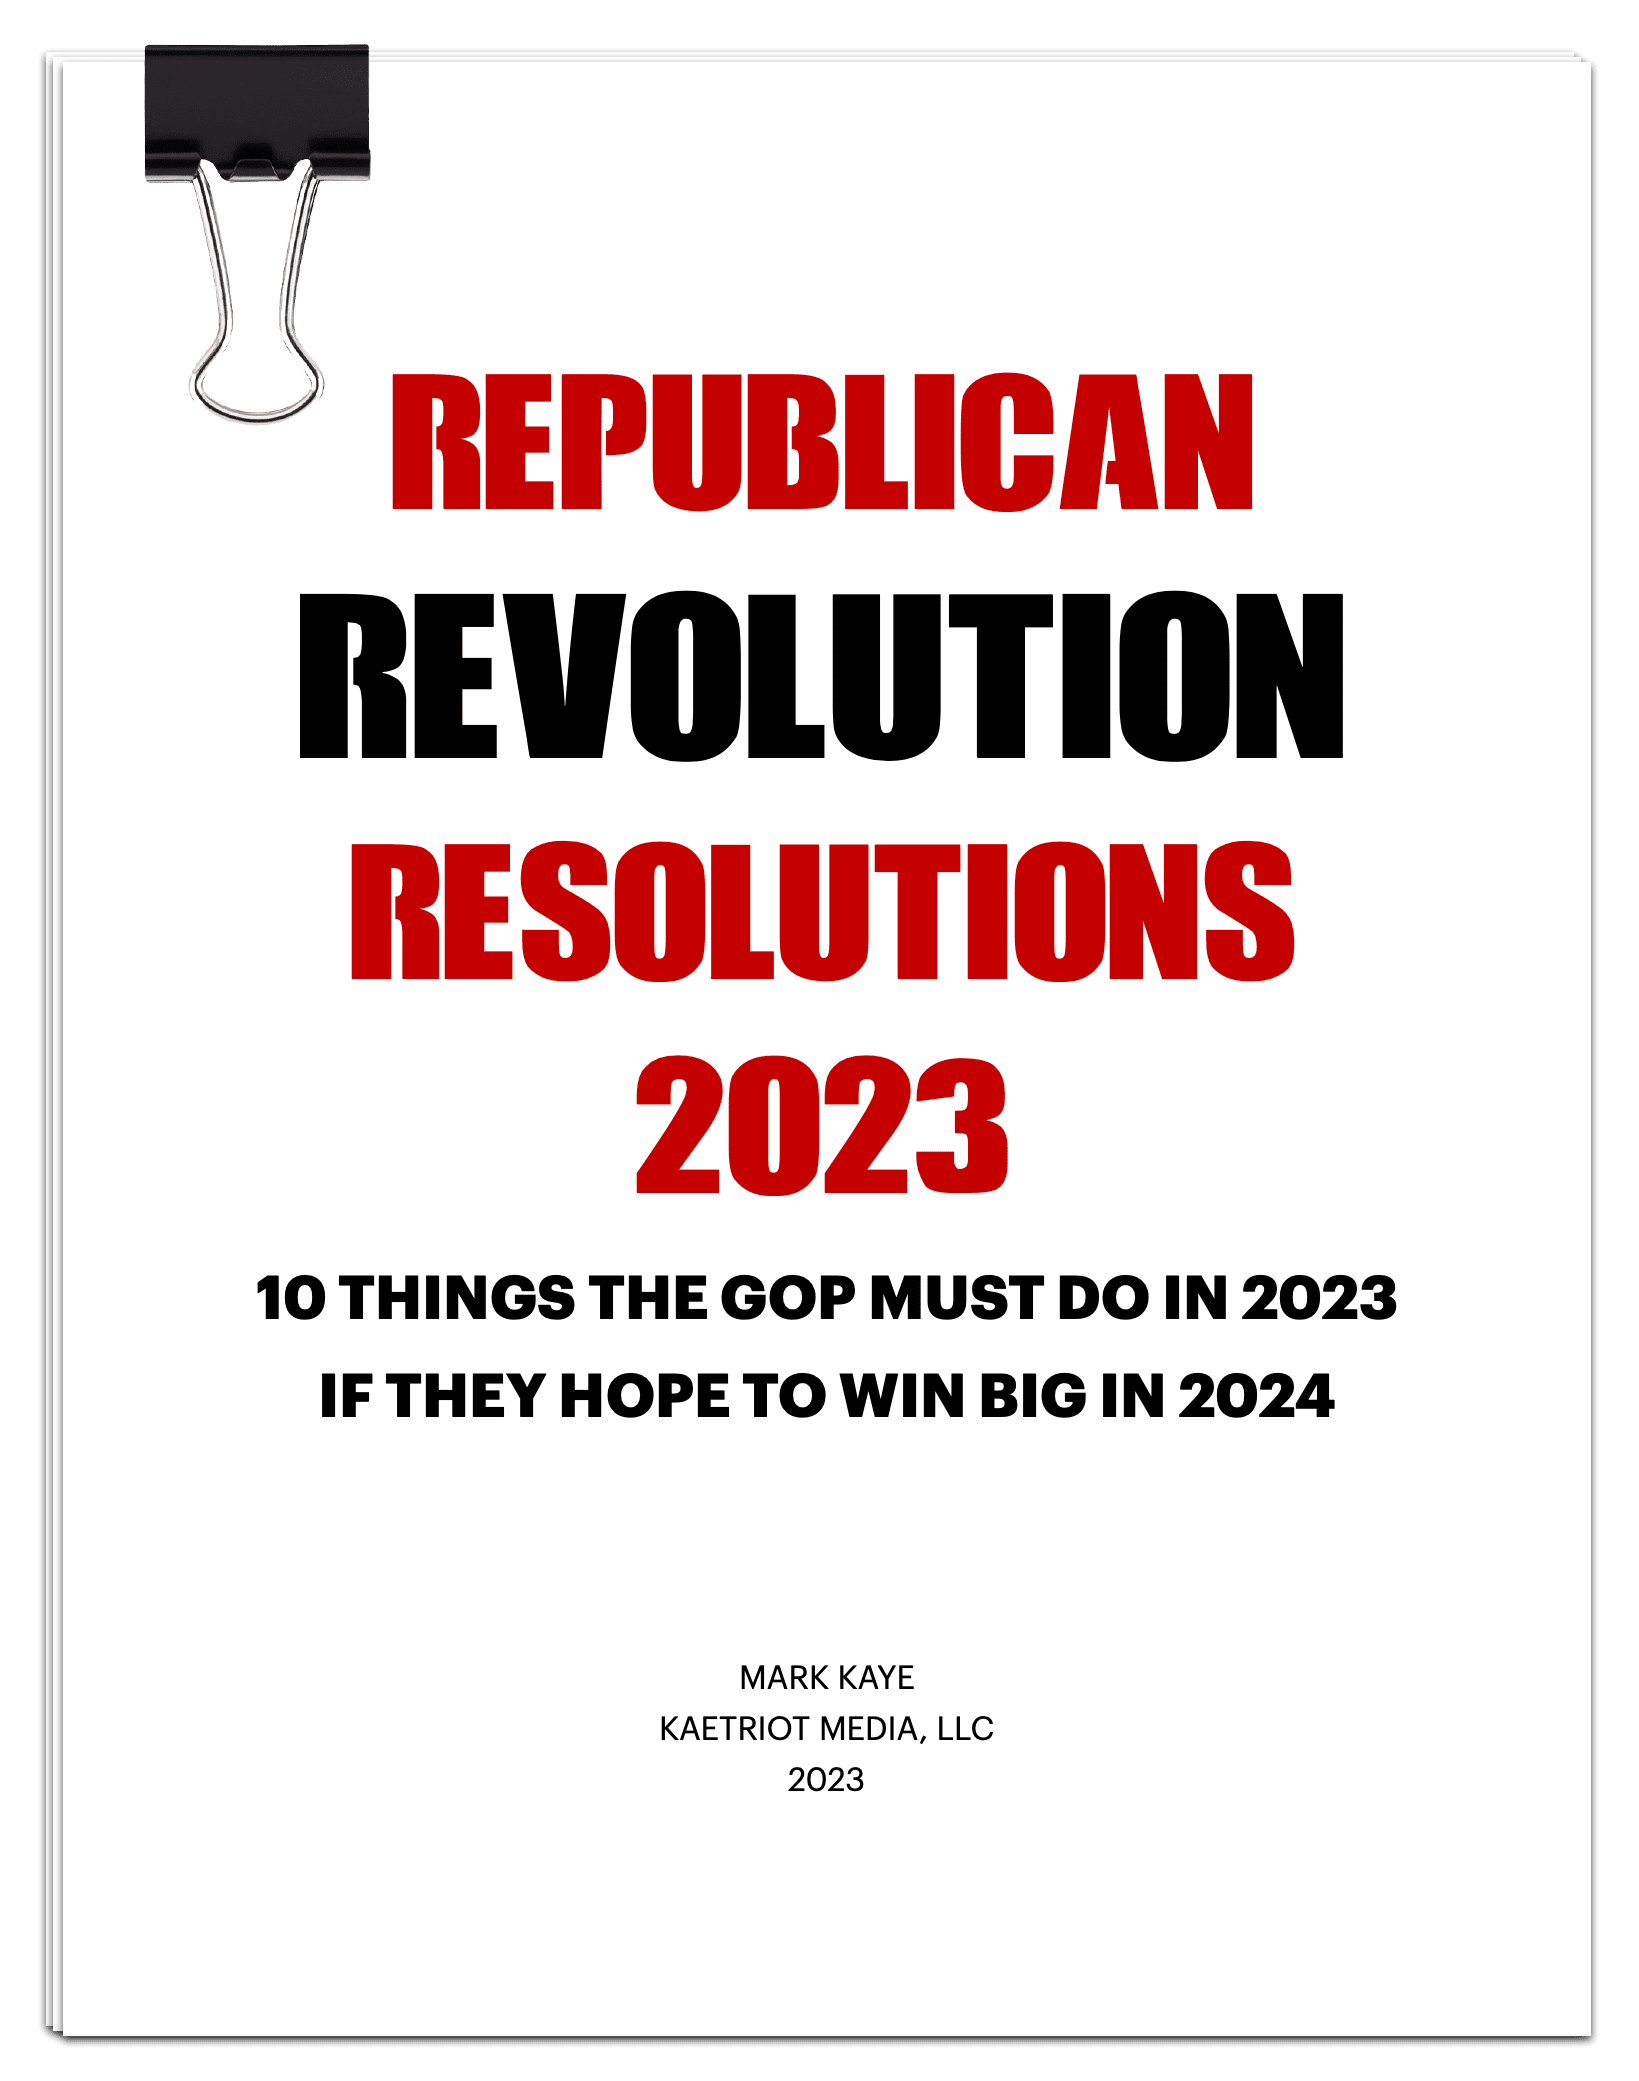 Mark Kaye, Author of Republican Revolution Resolutions 2023: 10 Things the GOP Must Do in 2023 if They Hope to Win Big in 2024